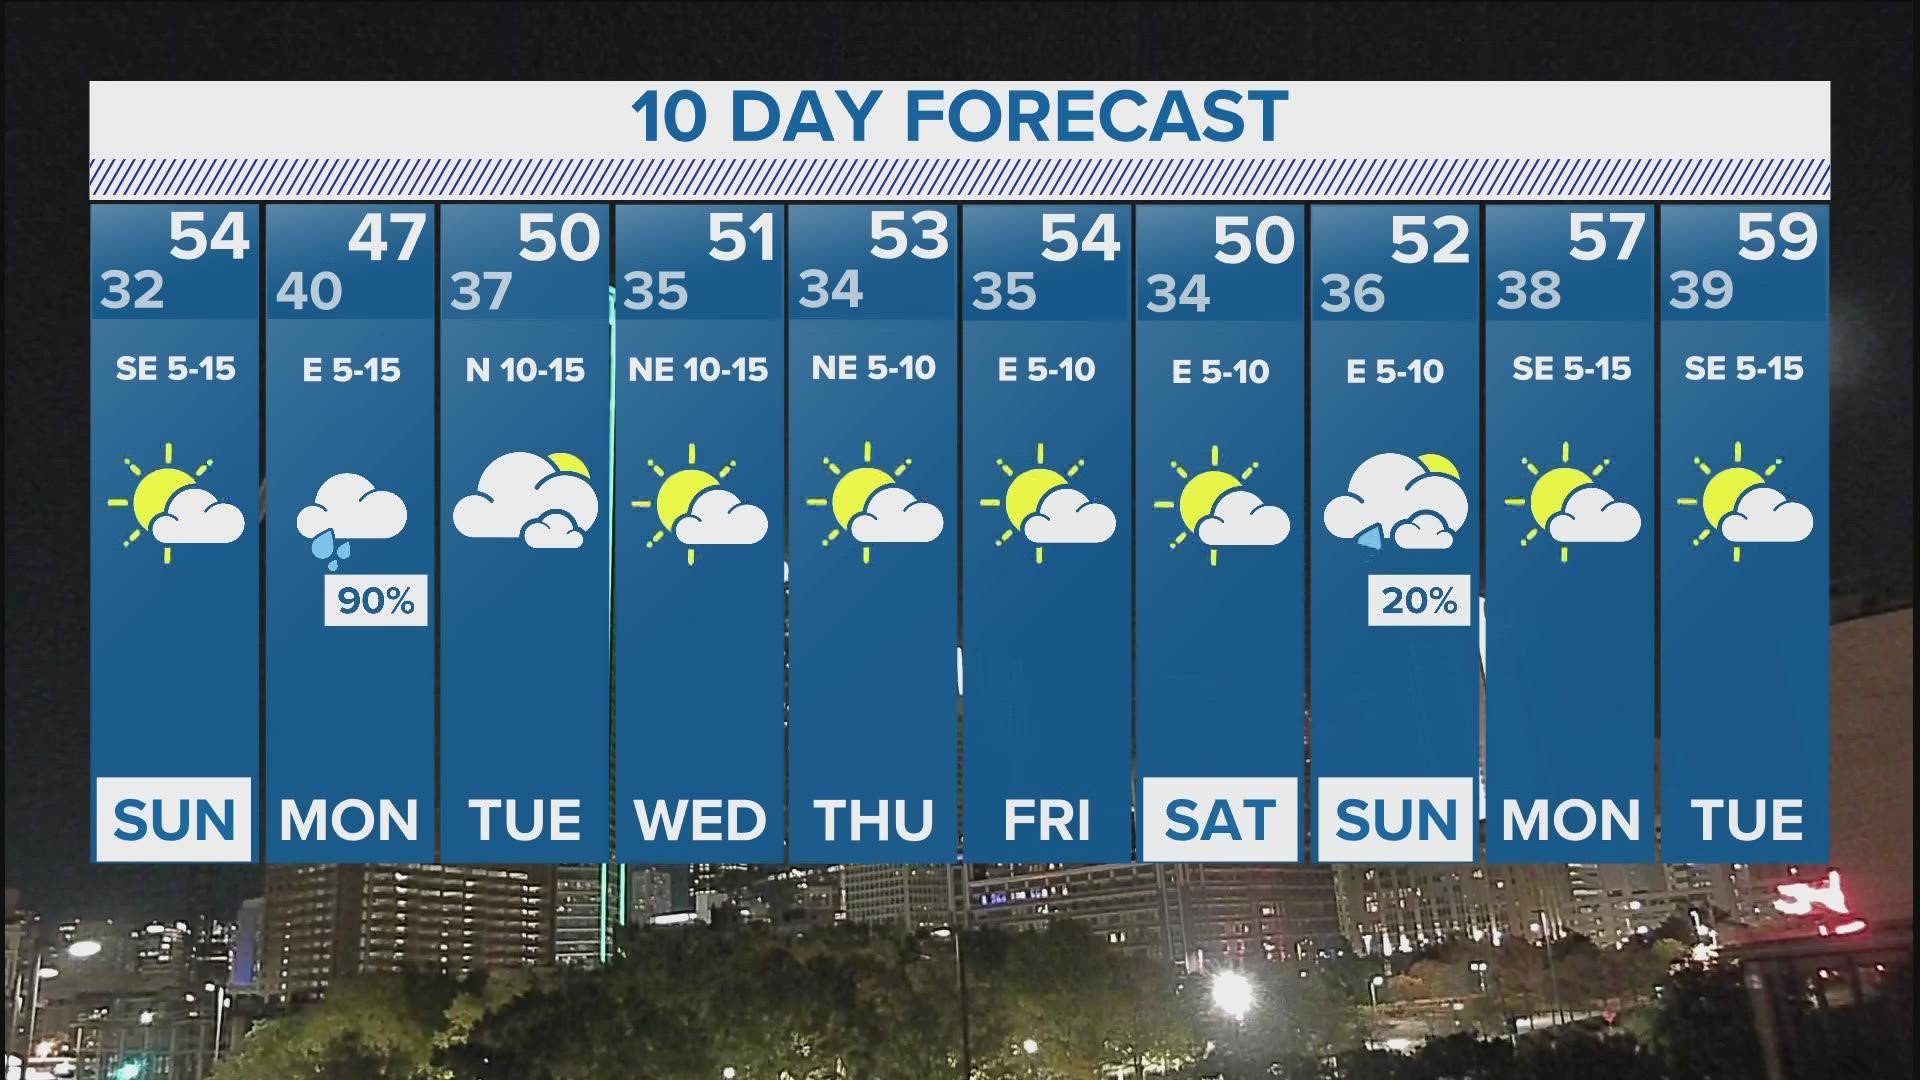 dfw-weather-your-10-day-forecast-for-north-texas-wfaa